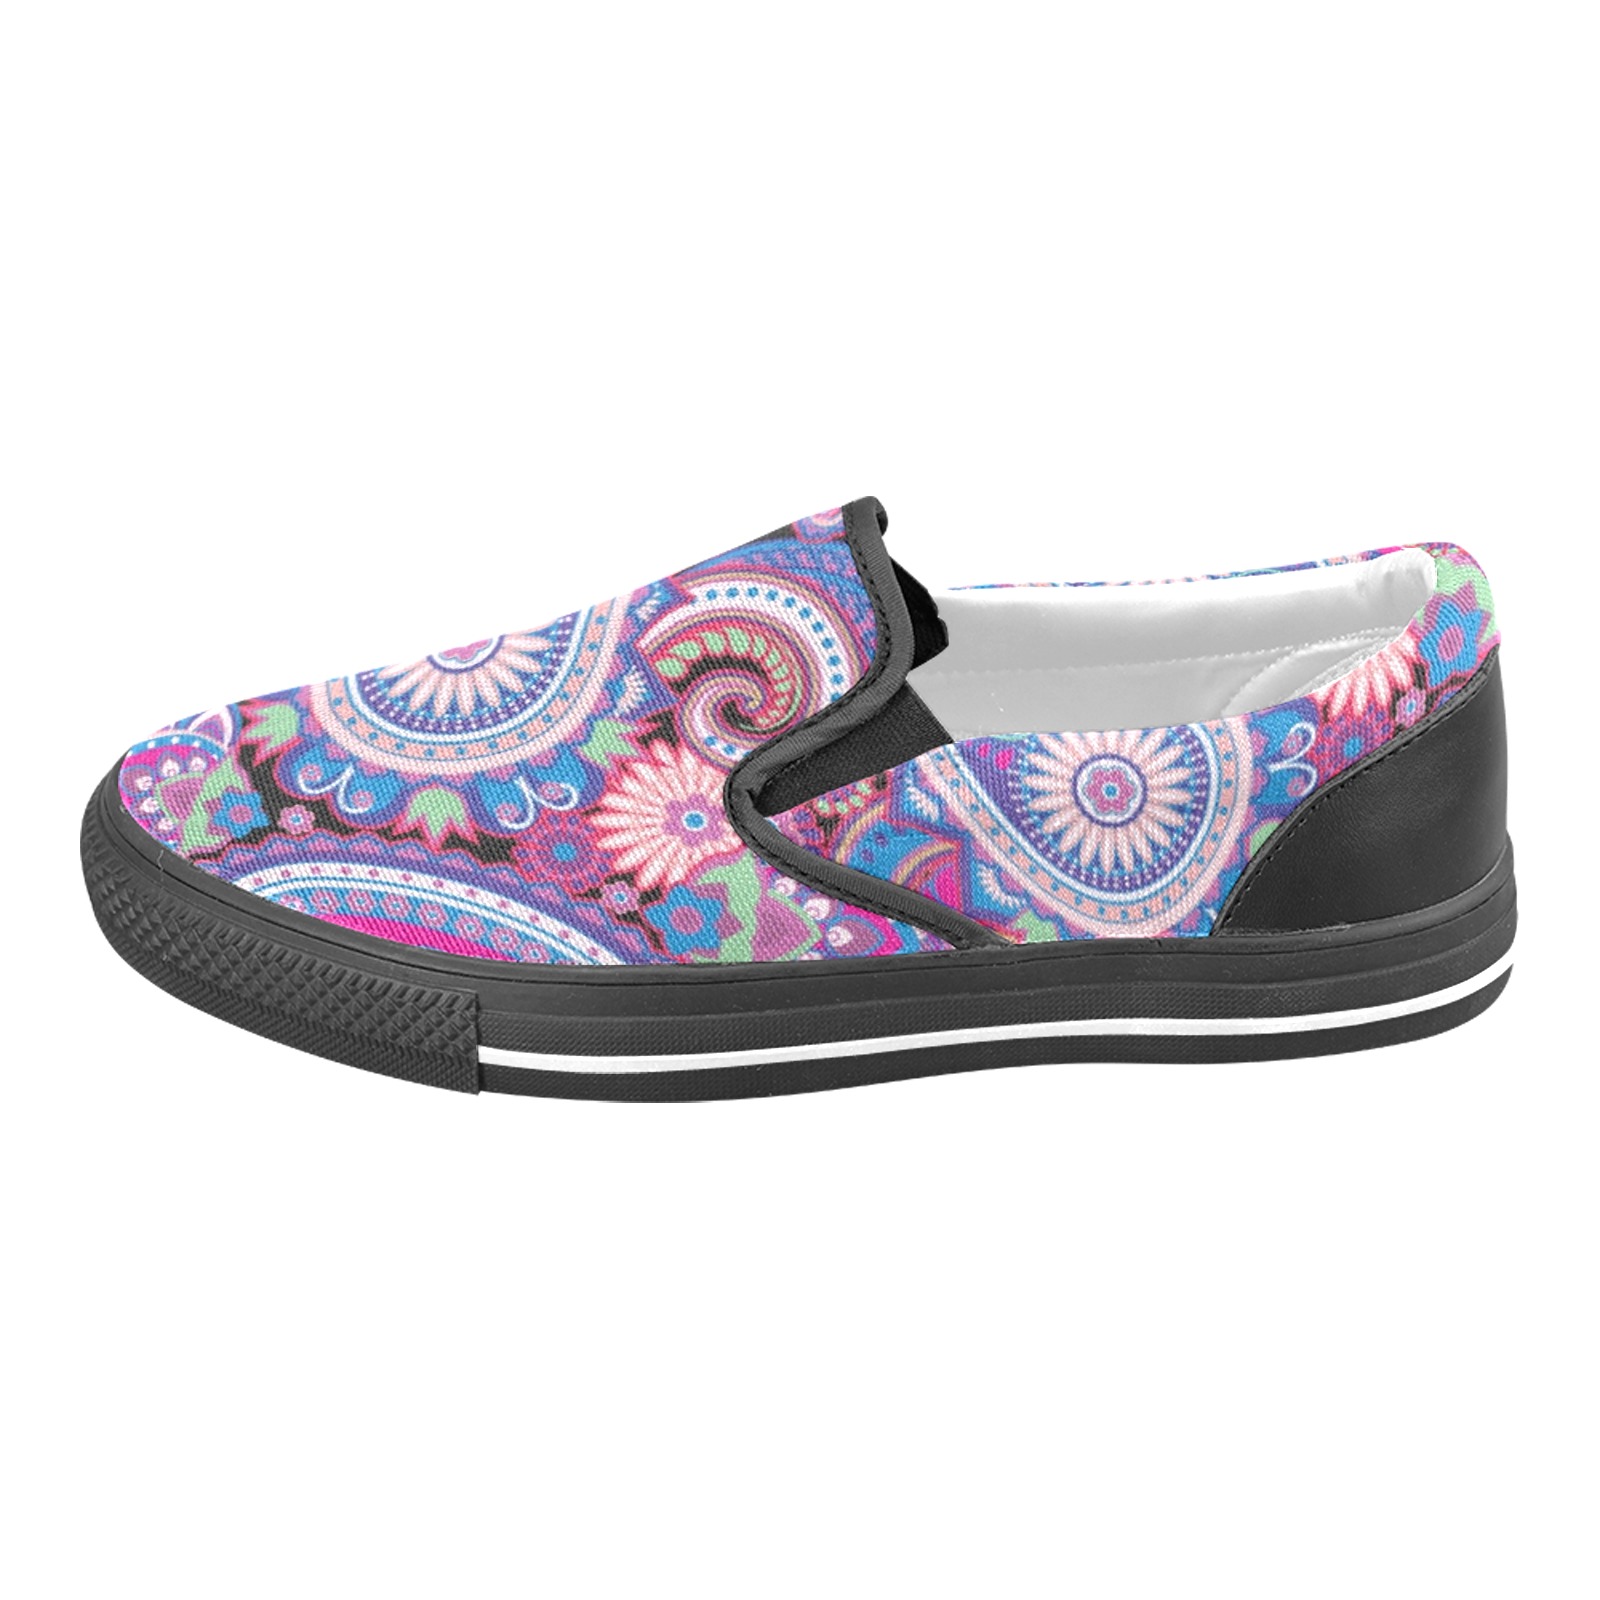 Seamless pattern based on traditional Asian elements Paisley_107916152.jpg Men's Slip-on Canvas Shoes (Model 019)